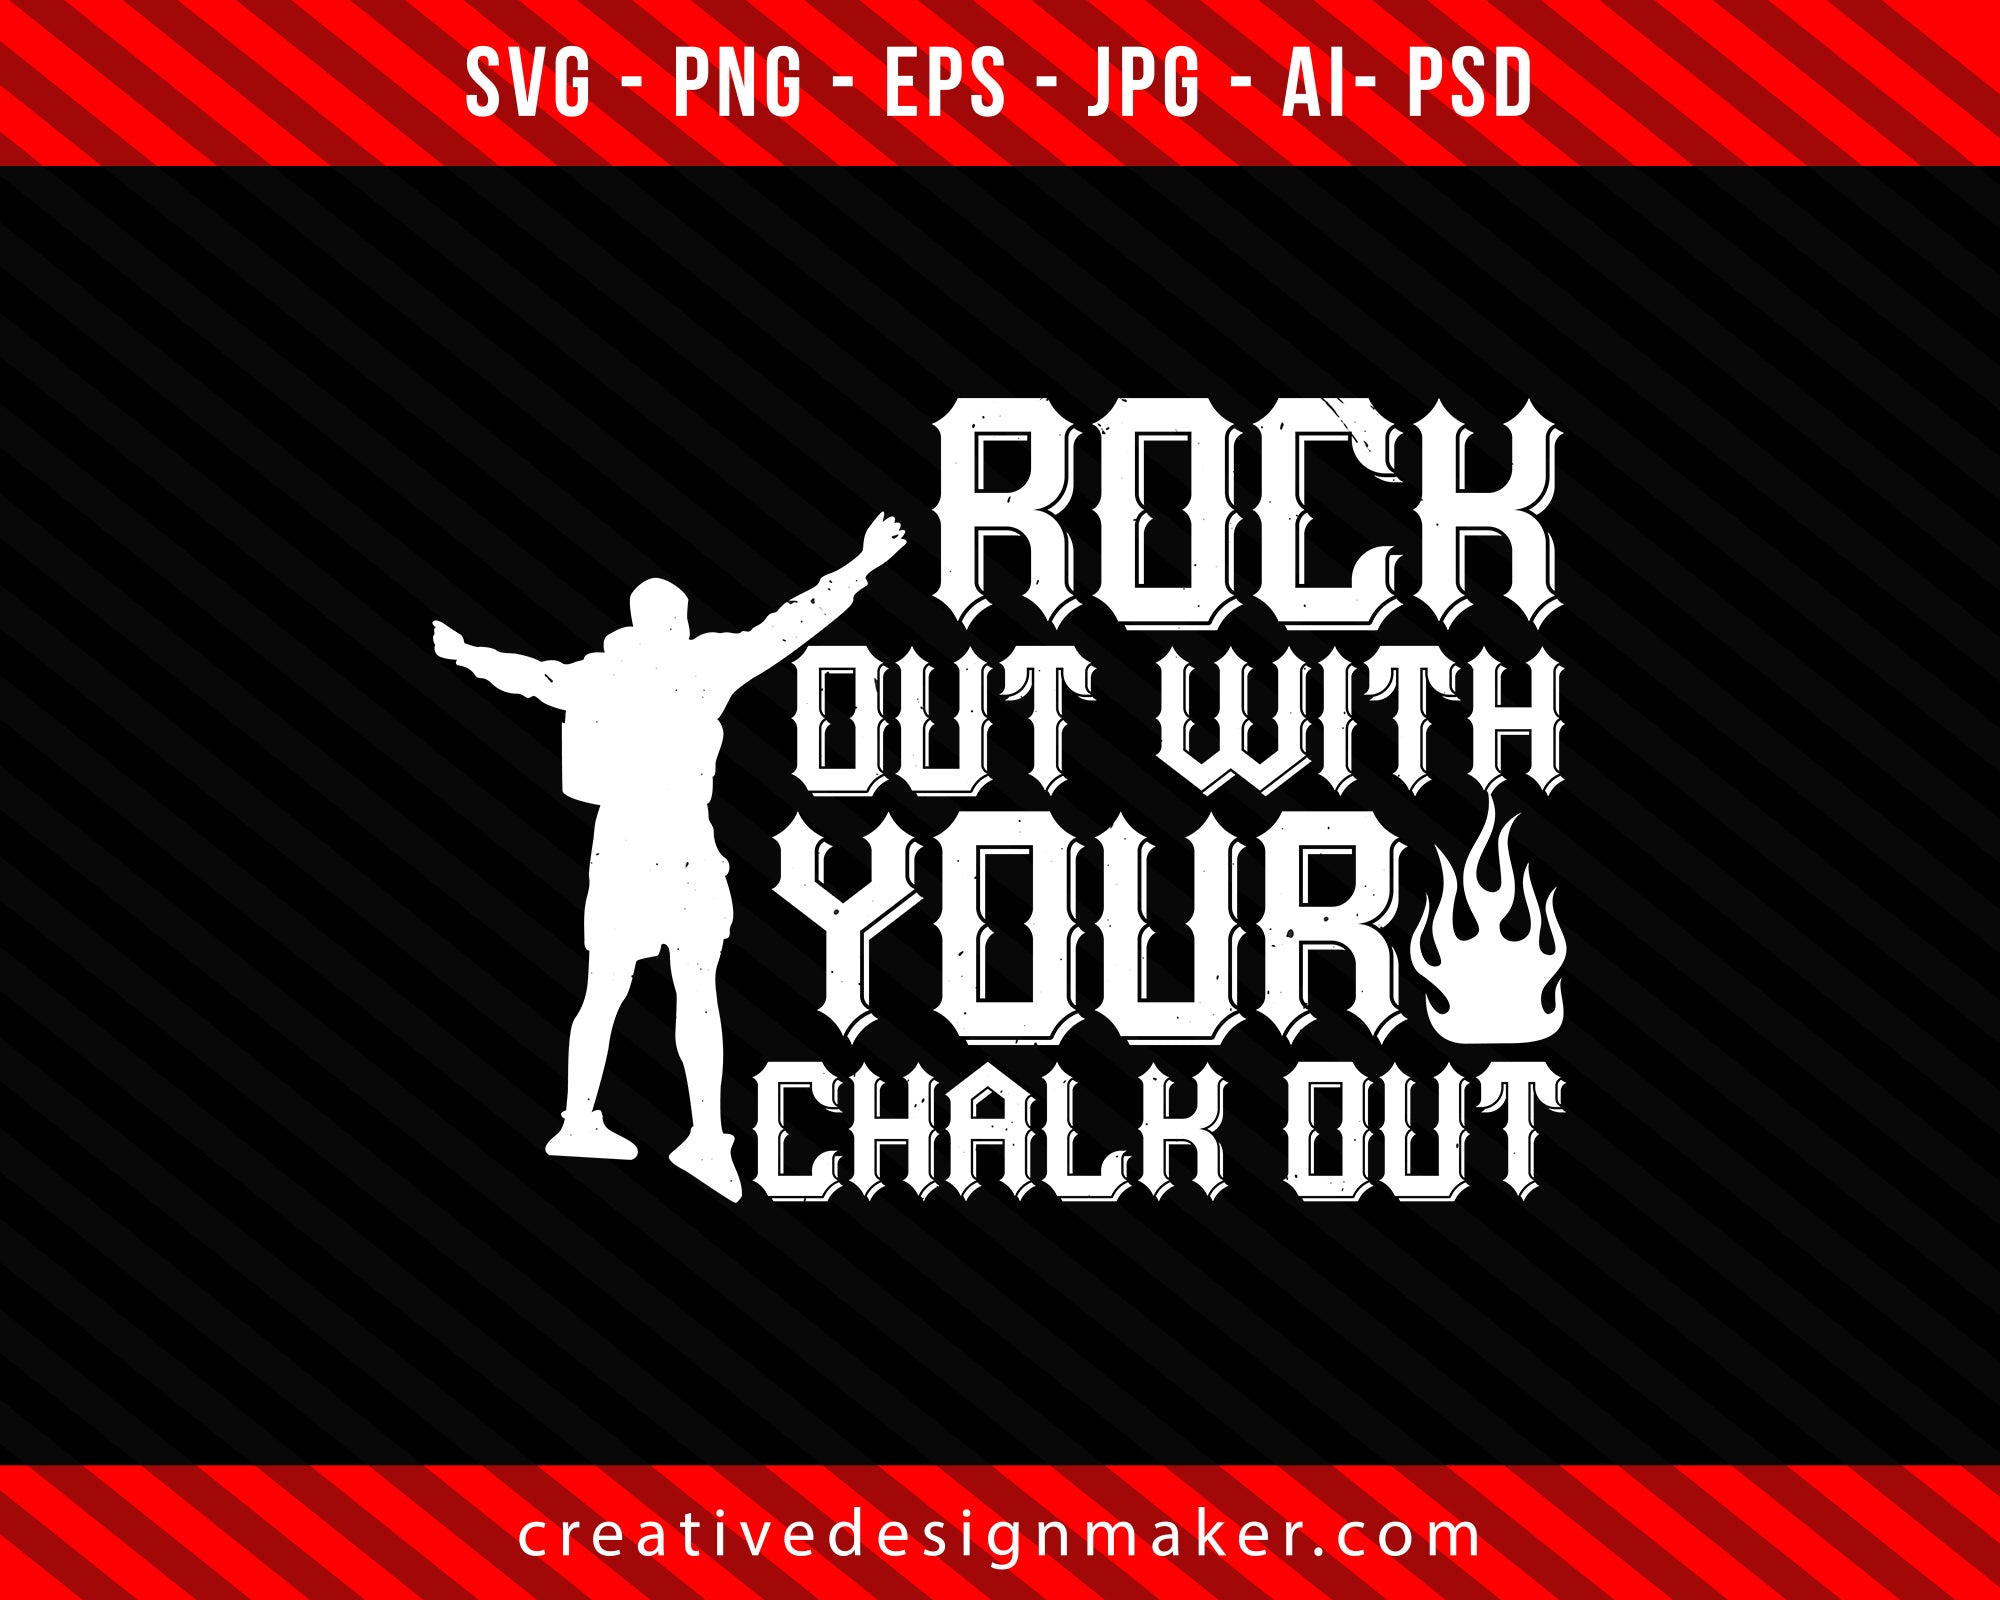 Rock out with your chalk out Climbing Print Ready Editable T-Shirt SVG Design!